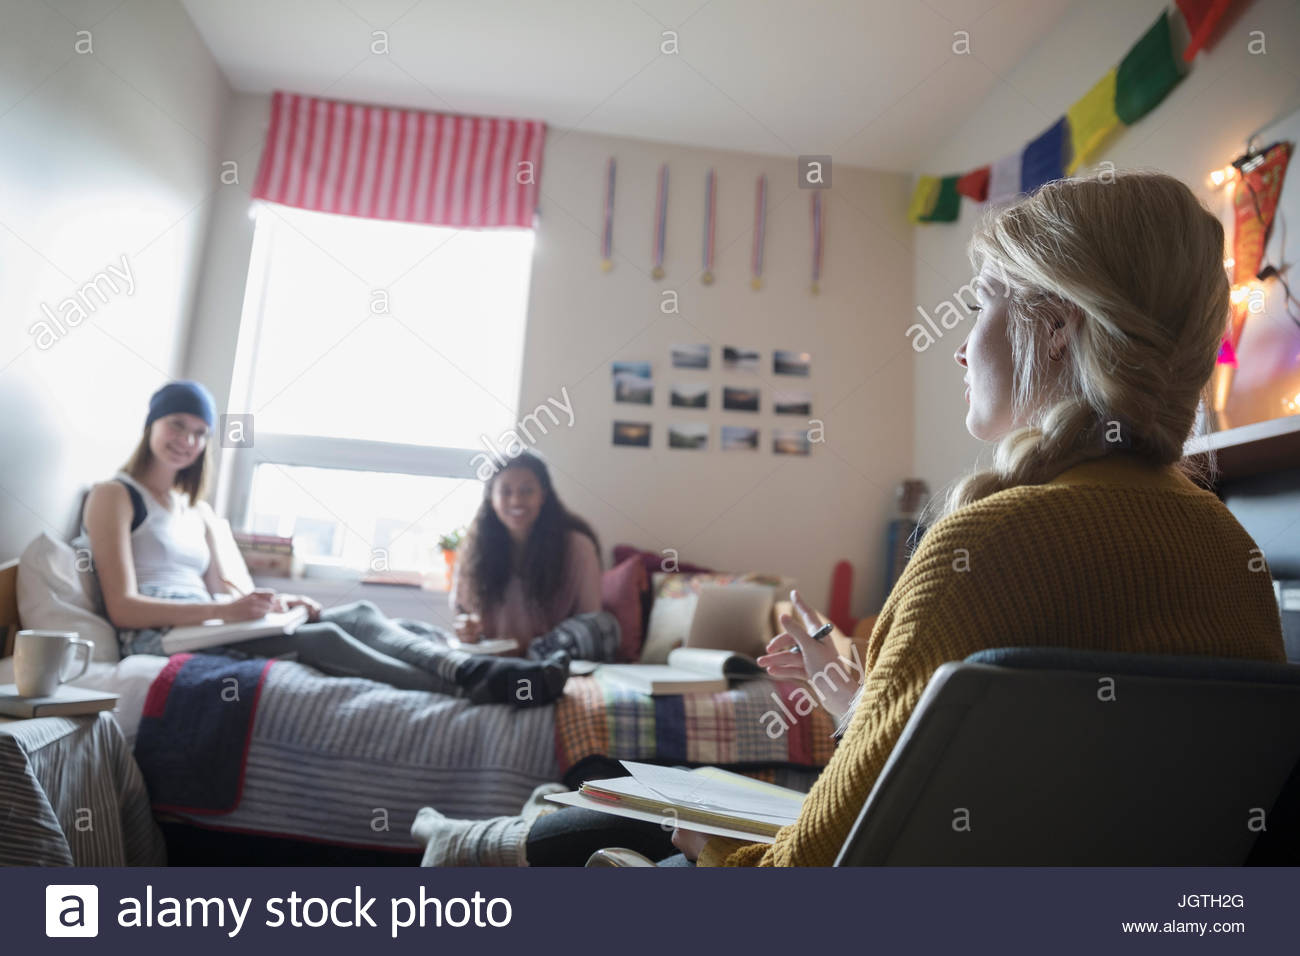 Female college students studying in dorm room Stock Photo